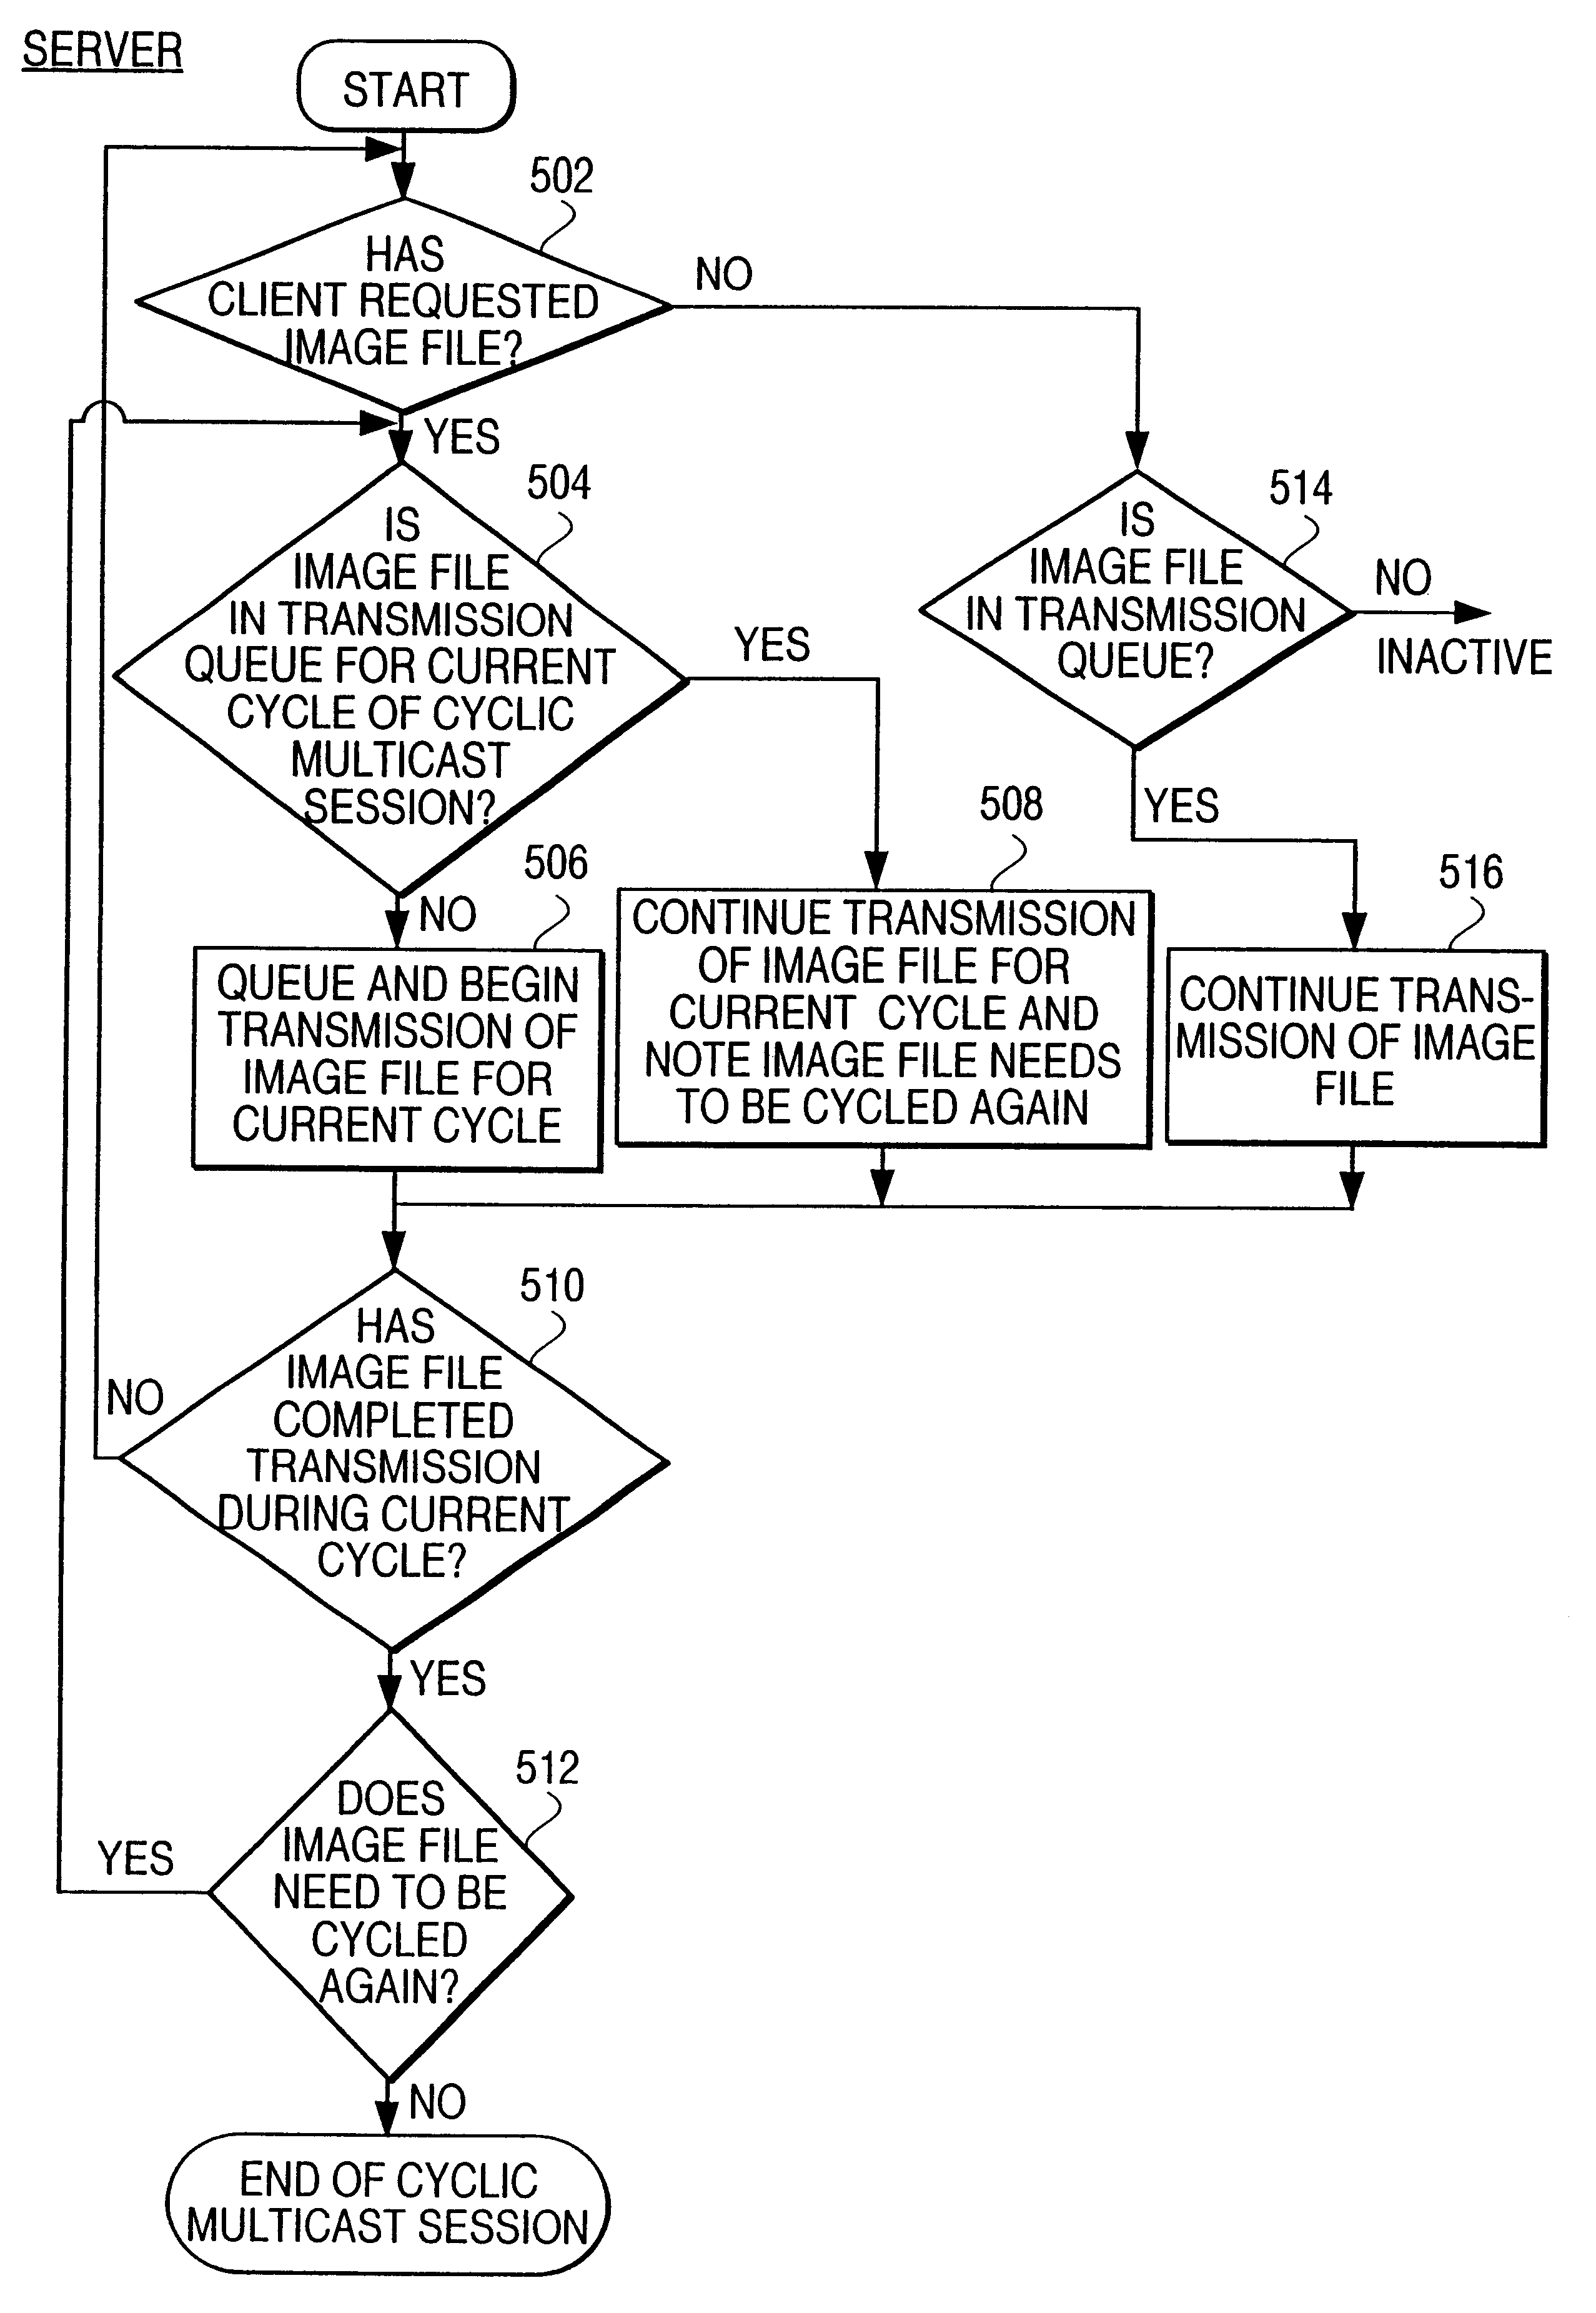 Cyclic multicasting or asynchronous broadcasting of computer files